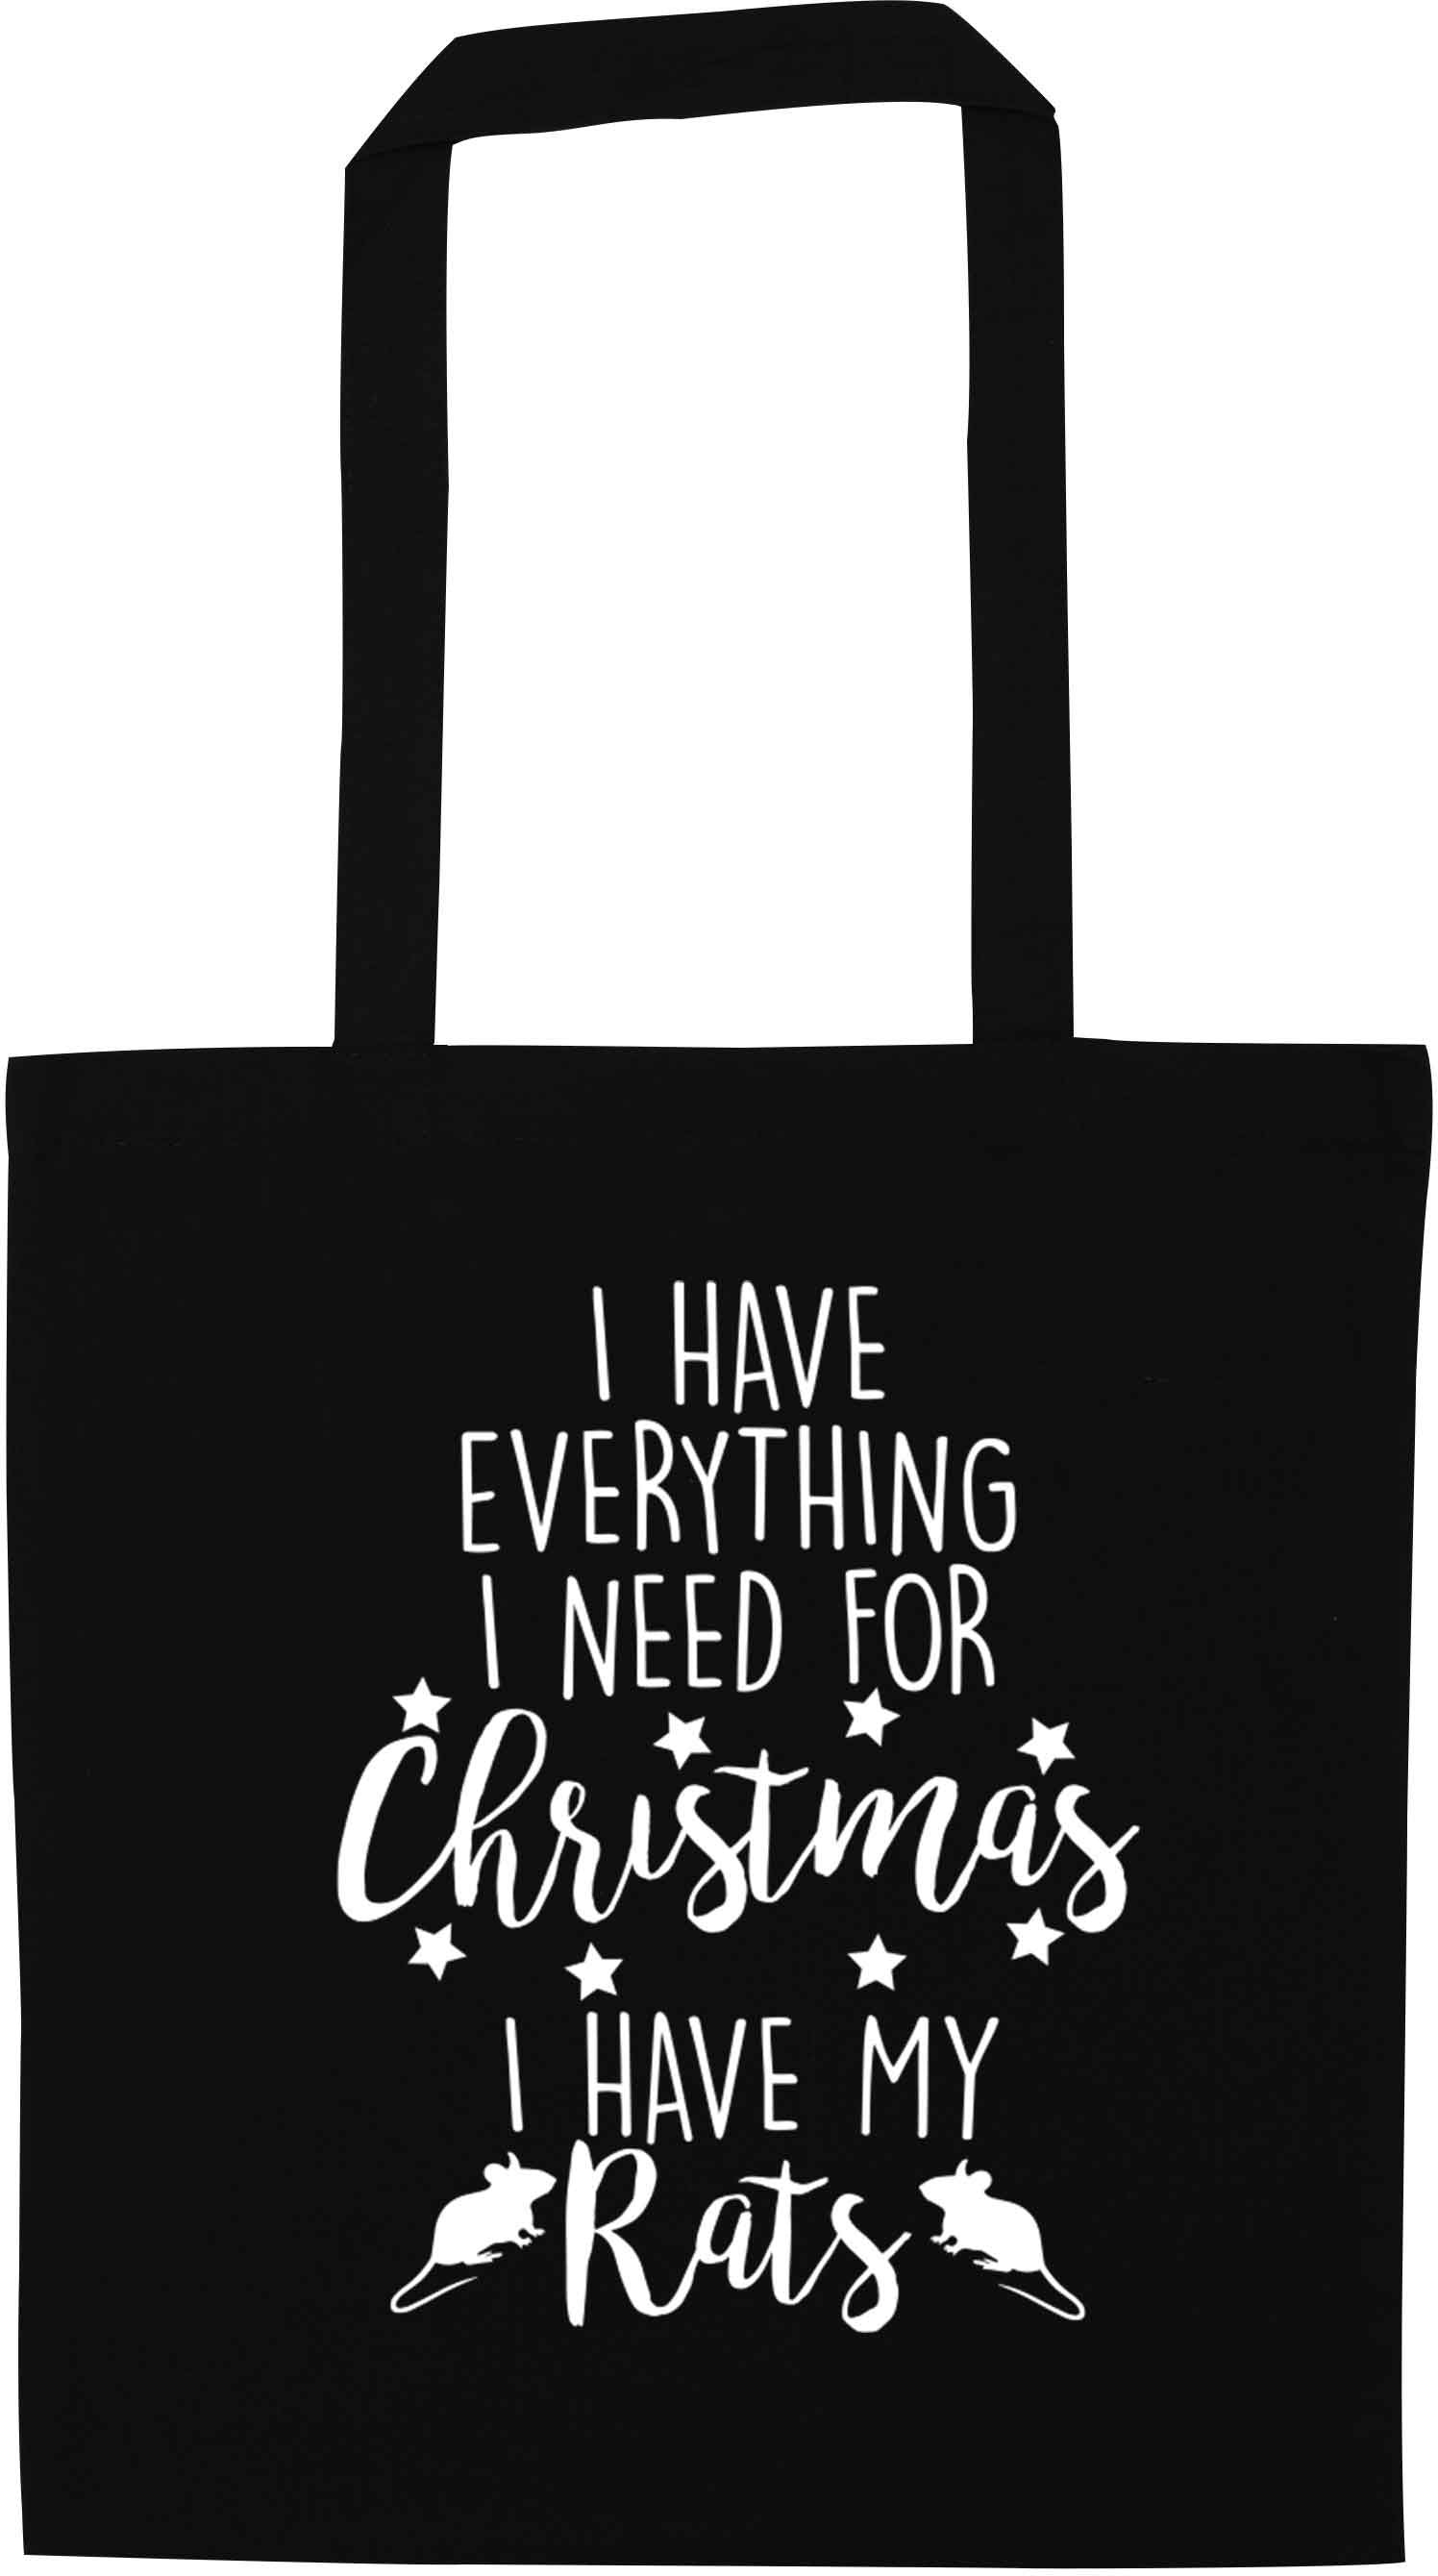 I have everything I need for Christmas I have my rats black tote bag